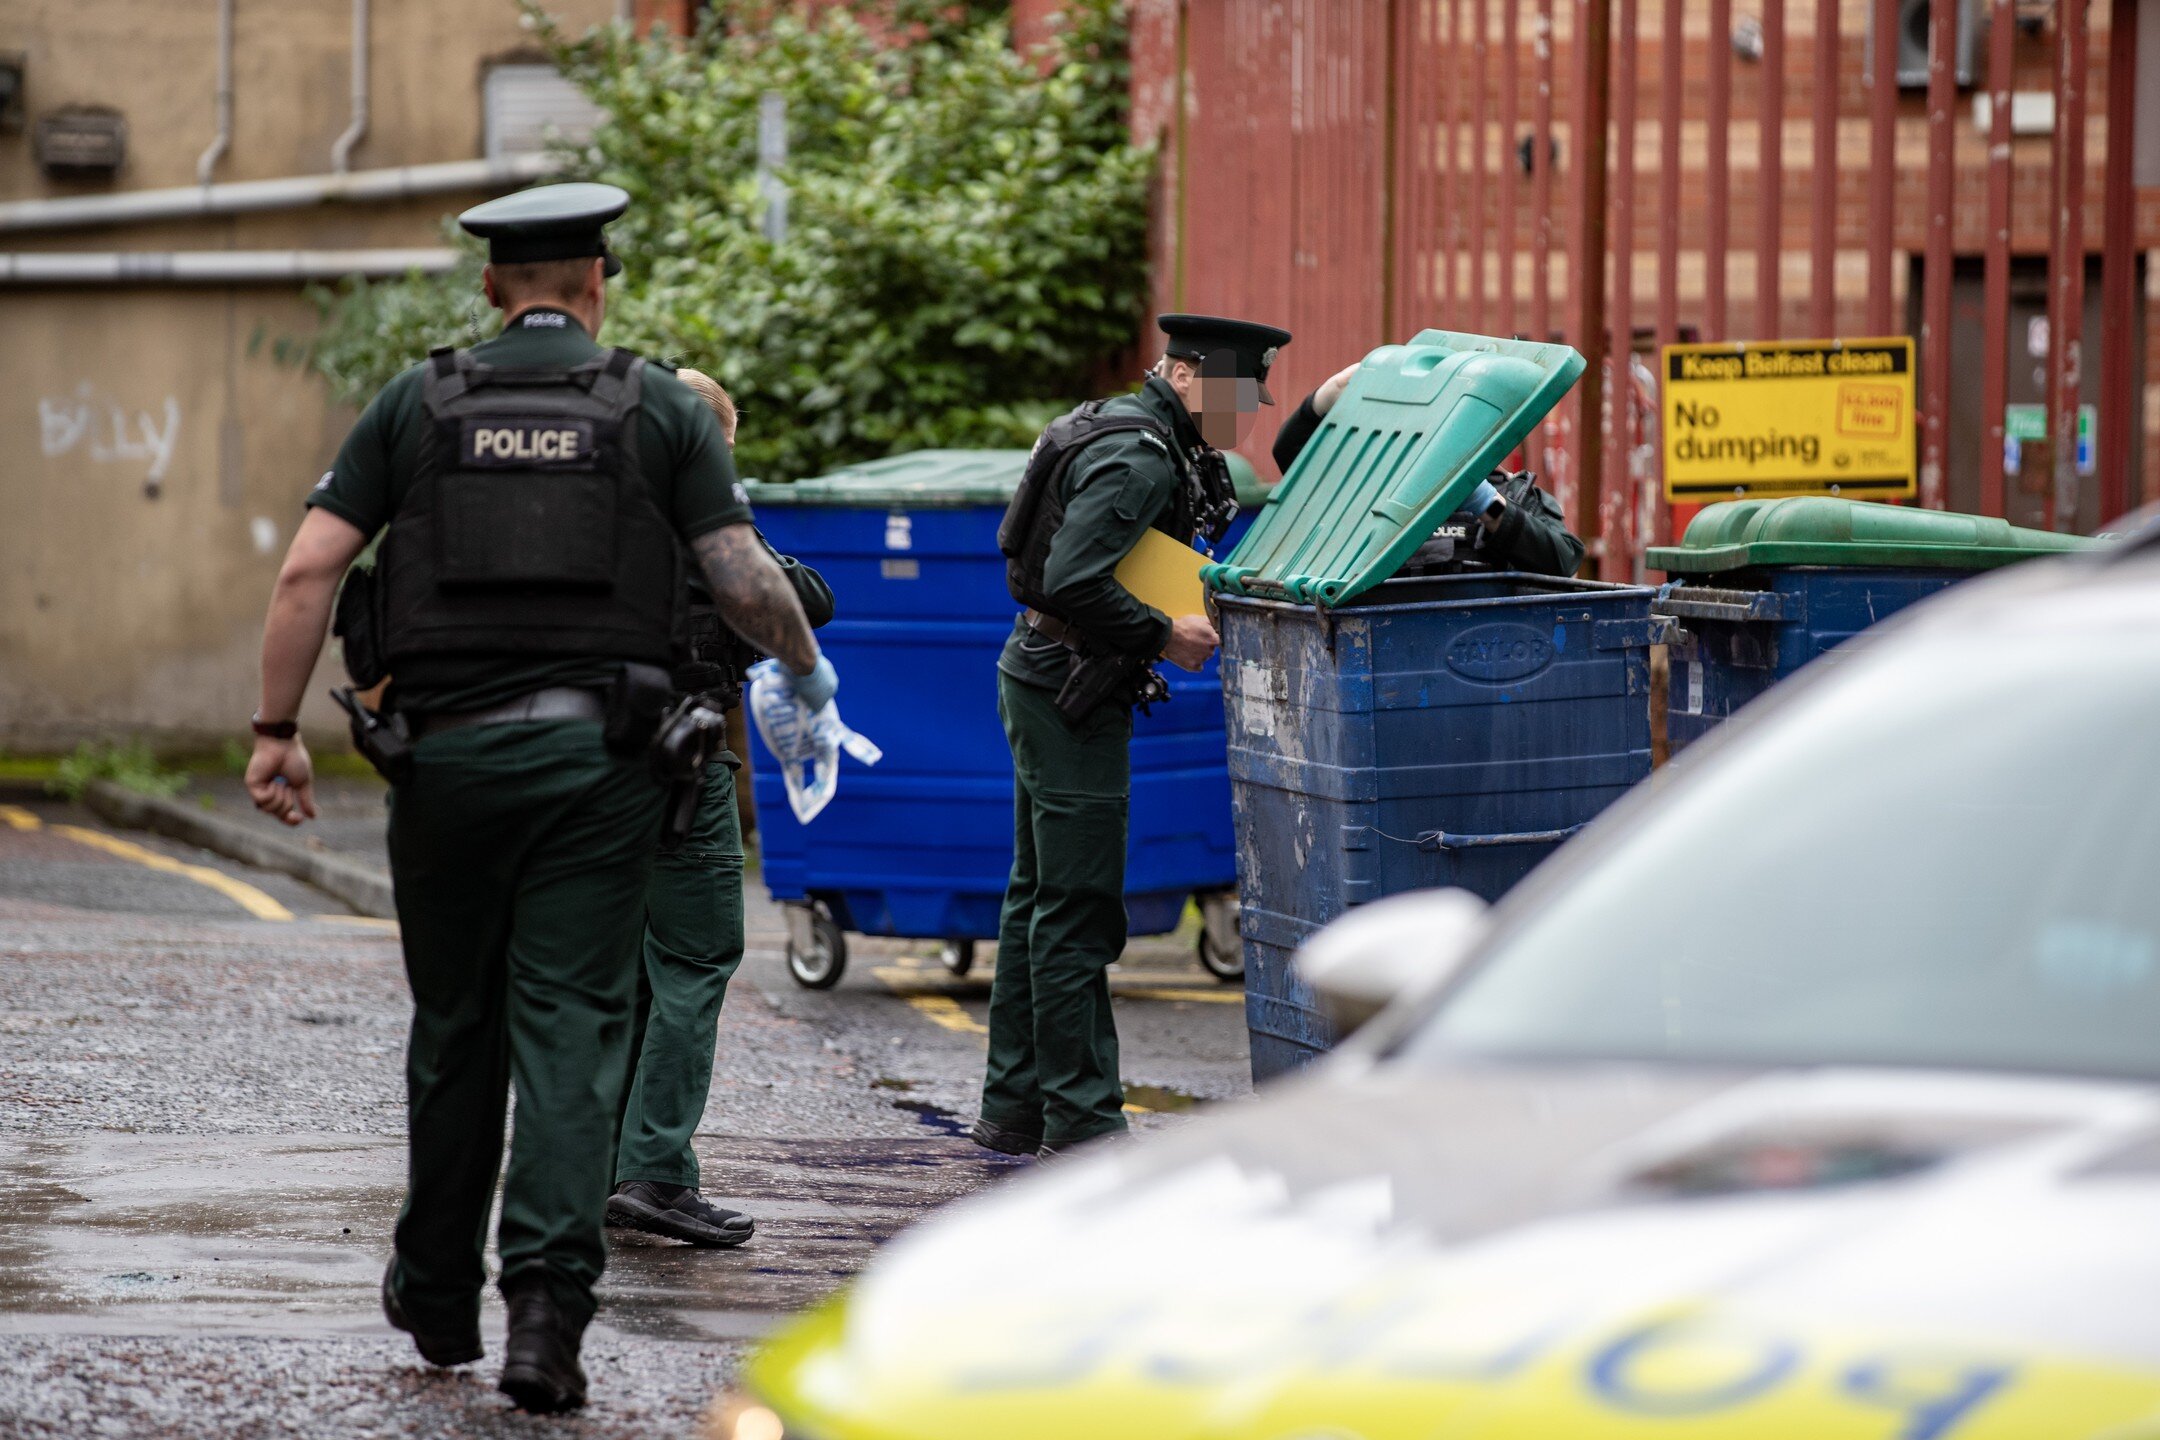 October 2023 - I forgot to post, decent pics.

A 36-year-old man was charged after a stabbing incident in Belfast city centre which left two men and two dogs injured.

Emergency services attended the scene of the incident at a flat in the Bradbury Pl